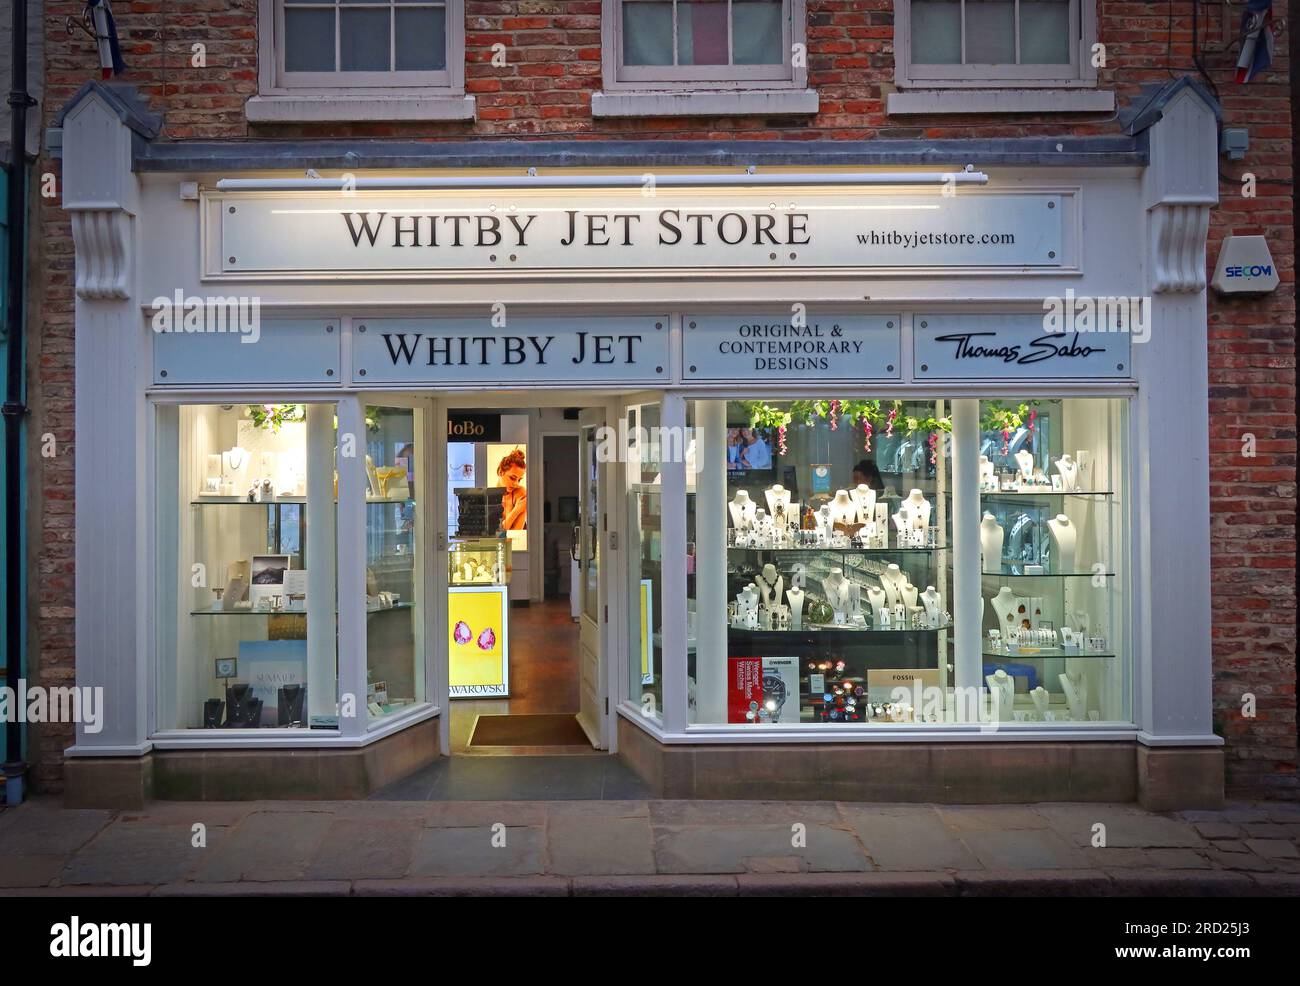 Whitby Touristengeschäfte, The Whitby Jet Store, 145 Church St, Whitby, North Yorkshire, Yorkshire, England, UK, YO22 4DE Stockfoto